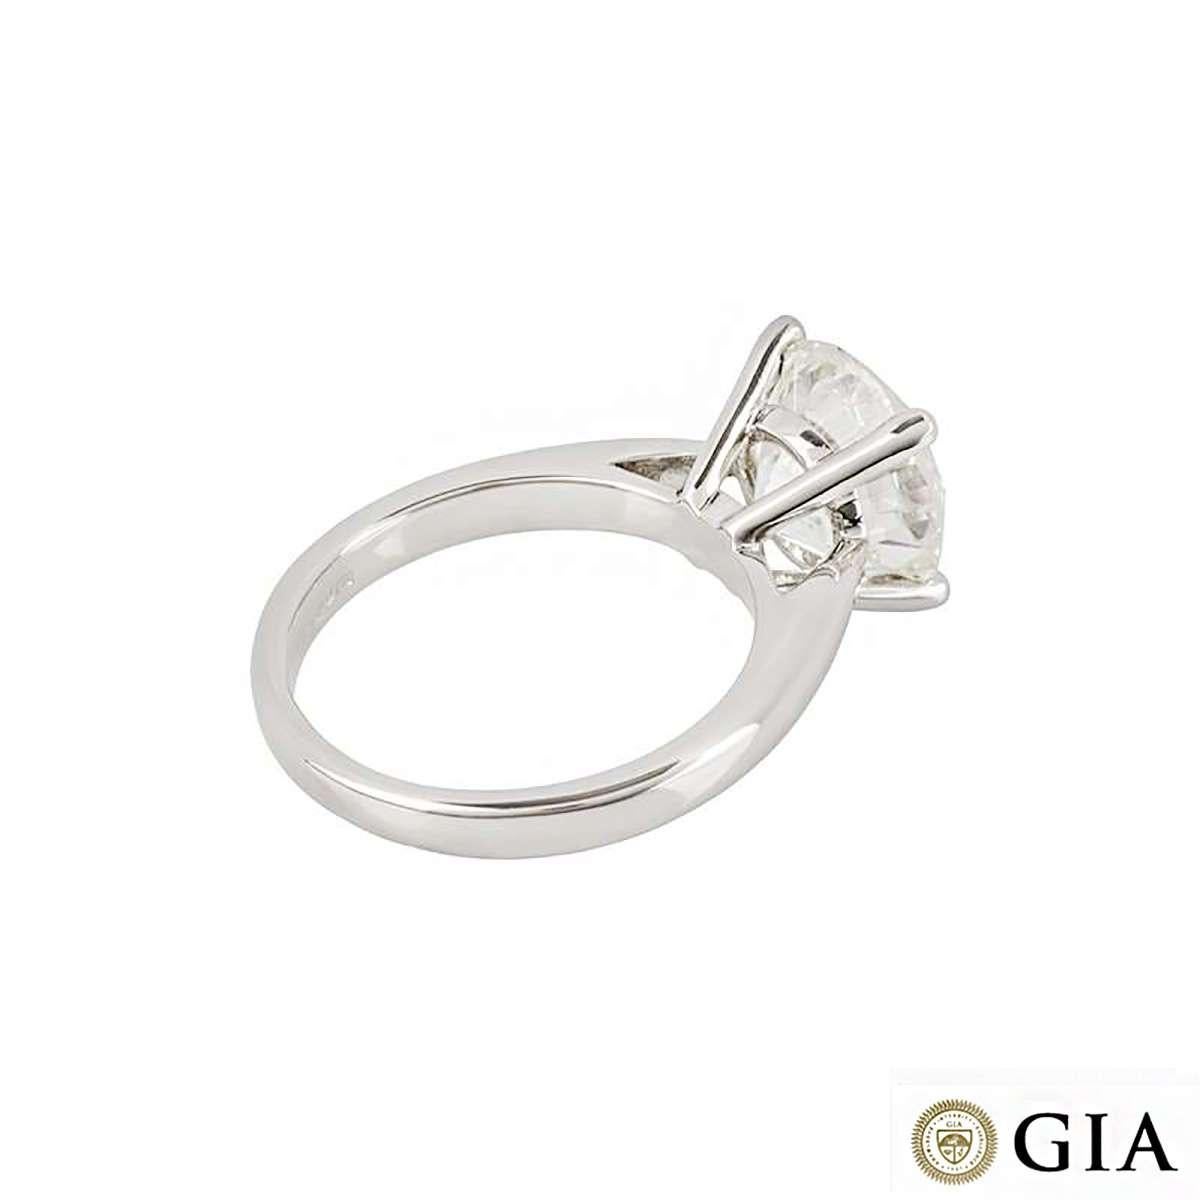 Women's GIA Certified Diamond Solitaire Engagement Ring 3.93 Carat H/VS1